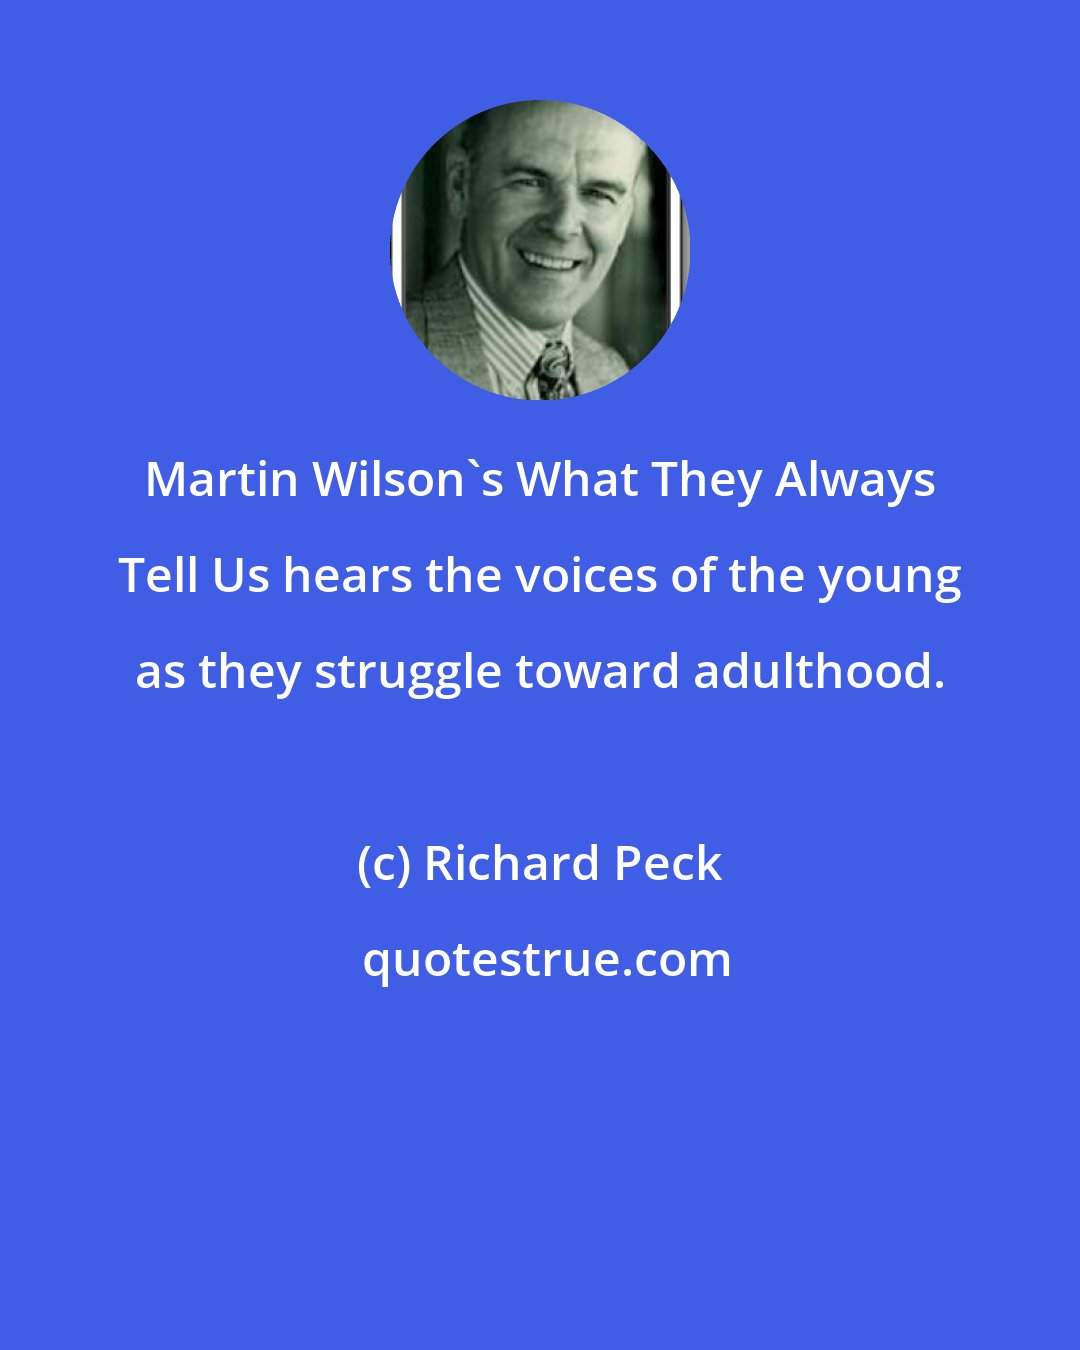 Richard Peck: Martin Wilson's What They Always Tell Us hears the voices of the young as they struggle toward adulthood.